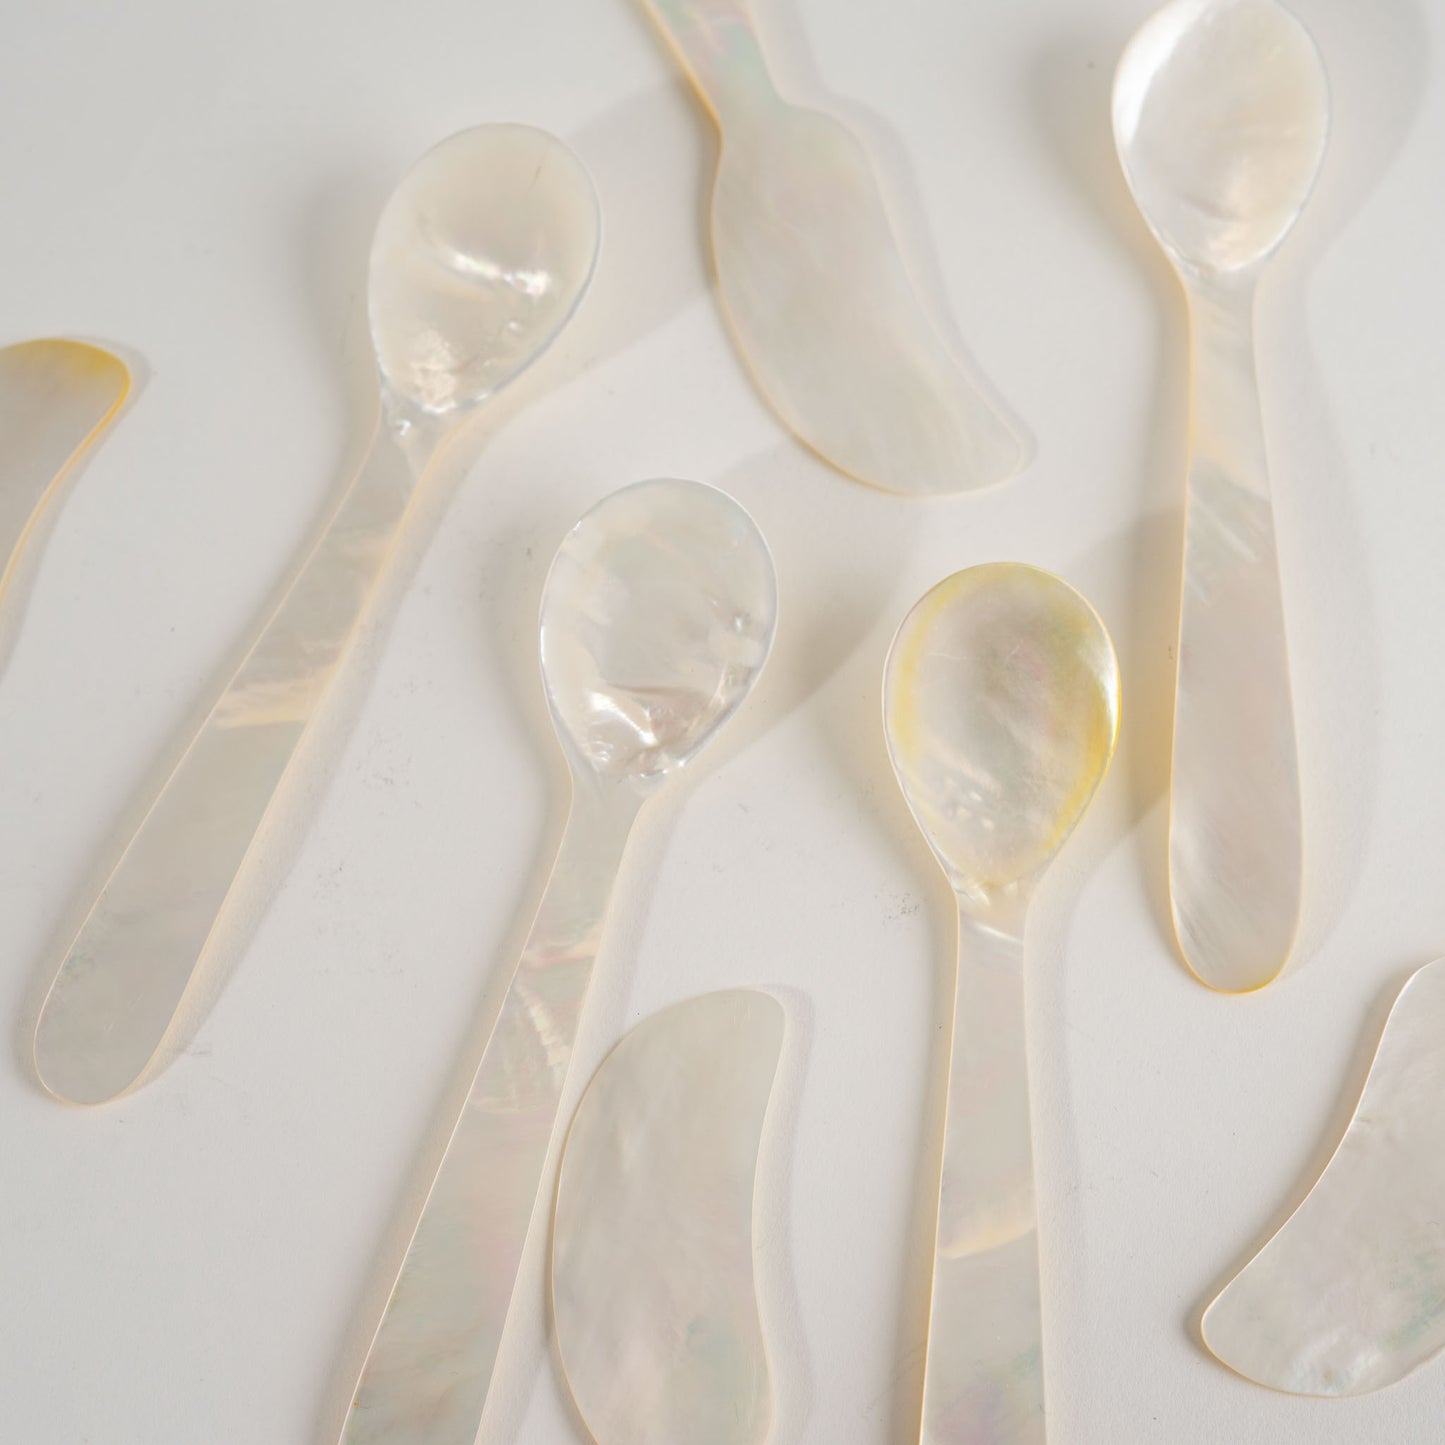 Load image into Gallery viewer, Vintage Mother of Pearl Caviar Spoons and Spreaders - Set of 8
